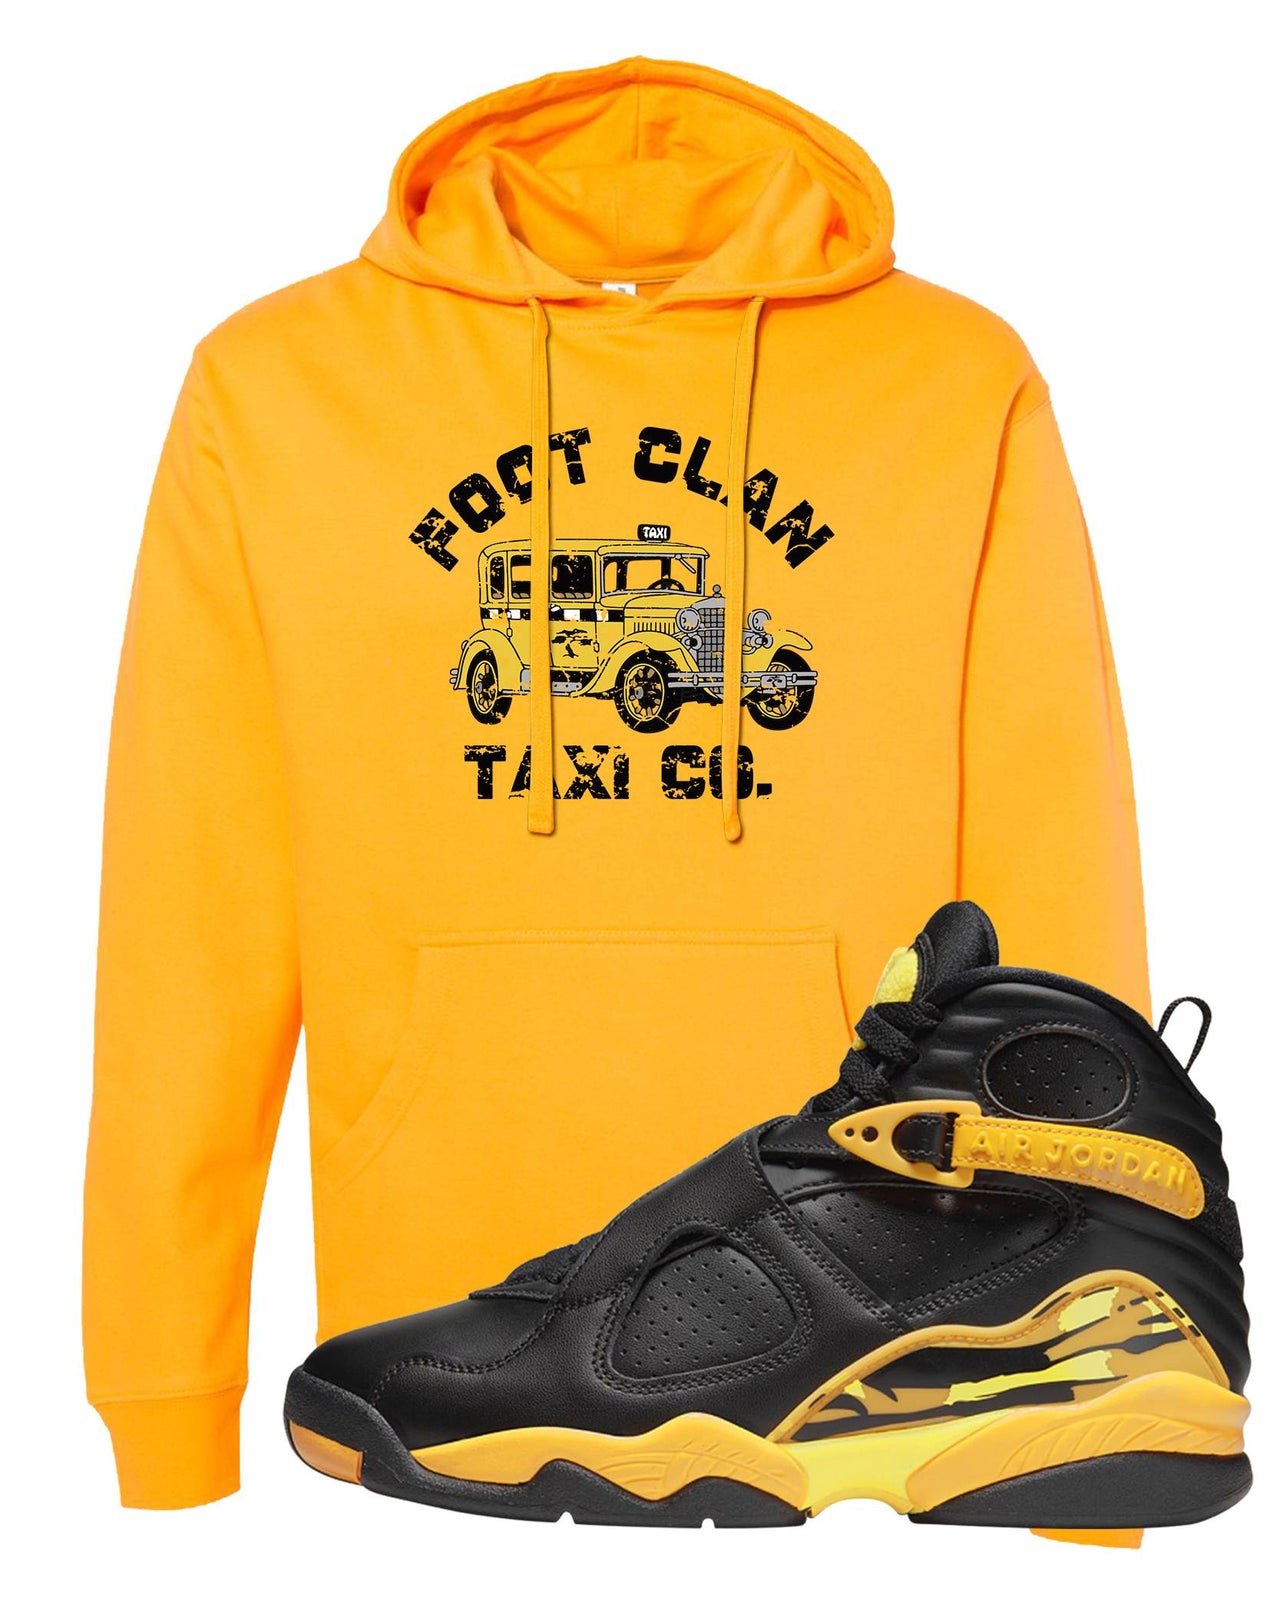 Taxi 8s Hoodie | Foot Clan Taxi Co., Gold